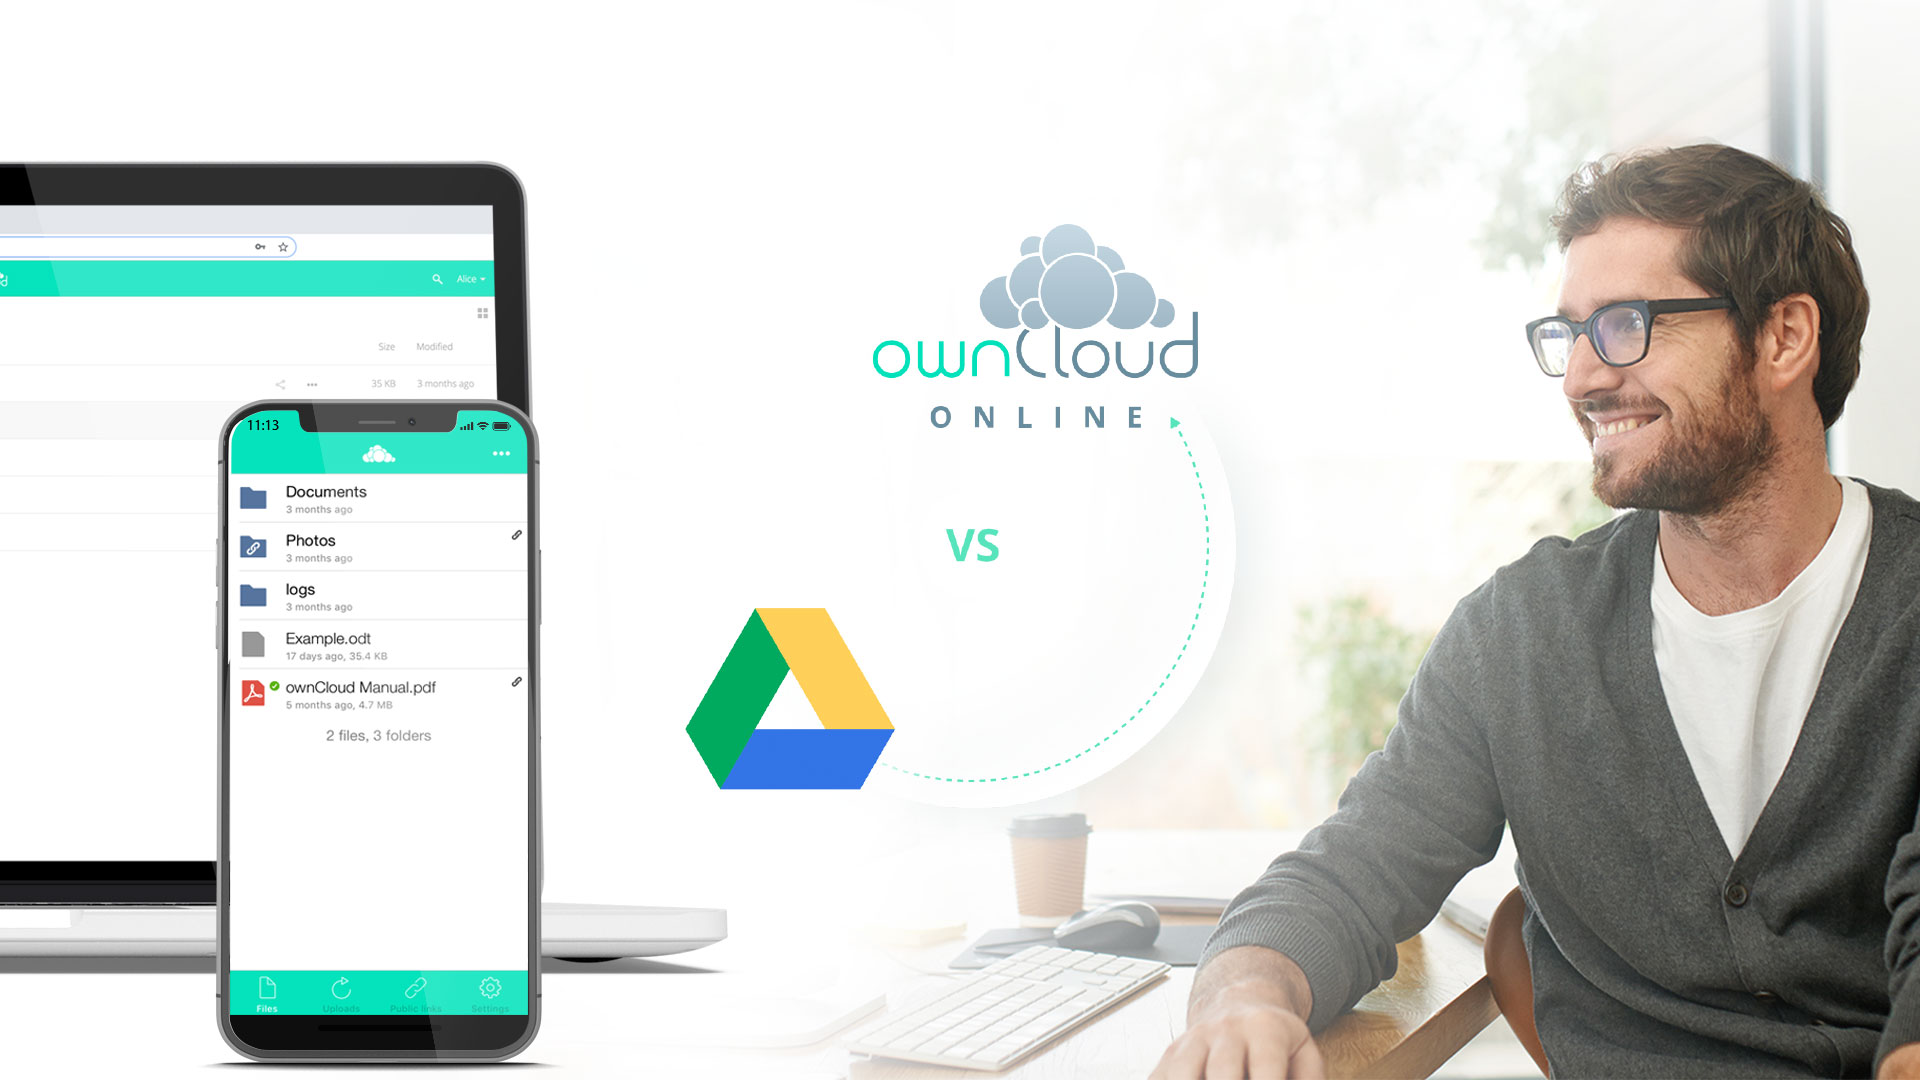 owncloud remote access